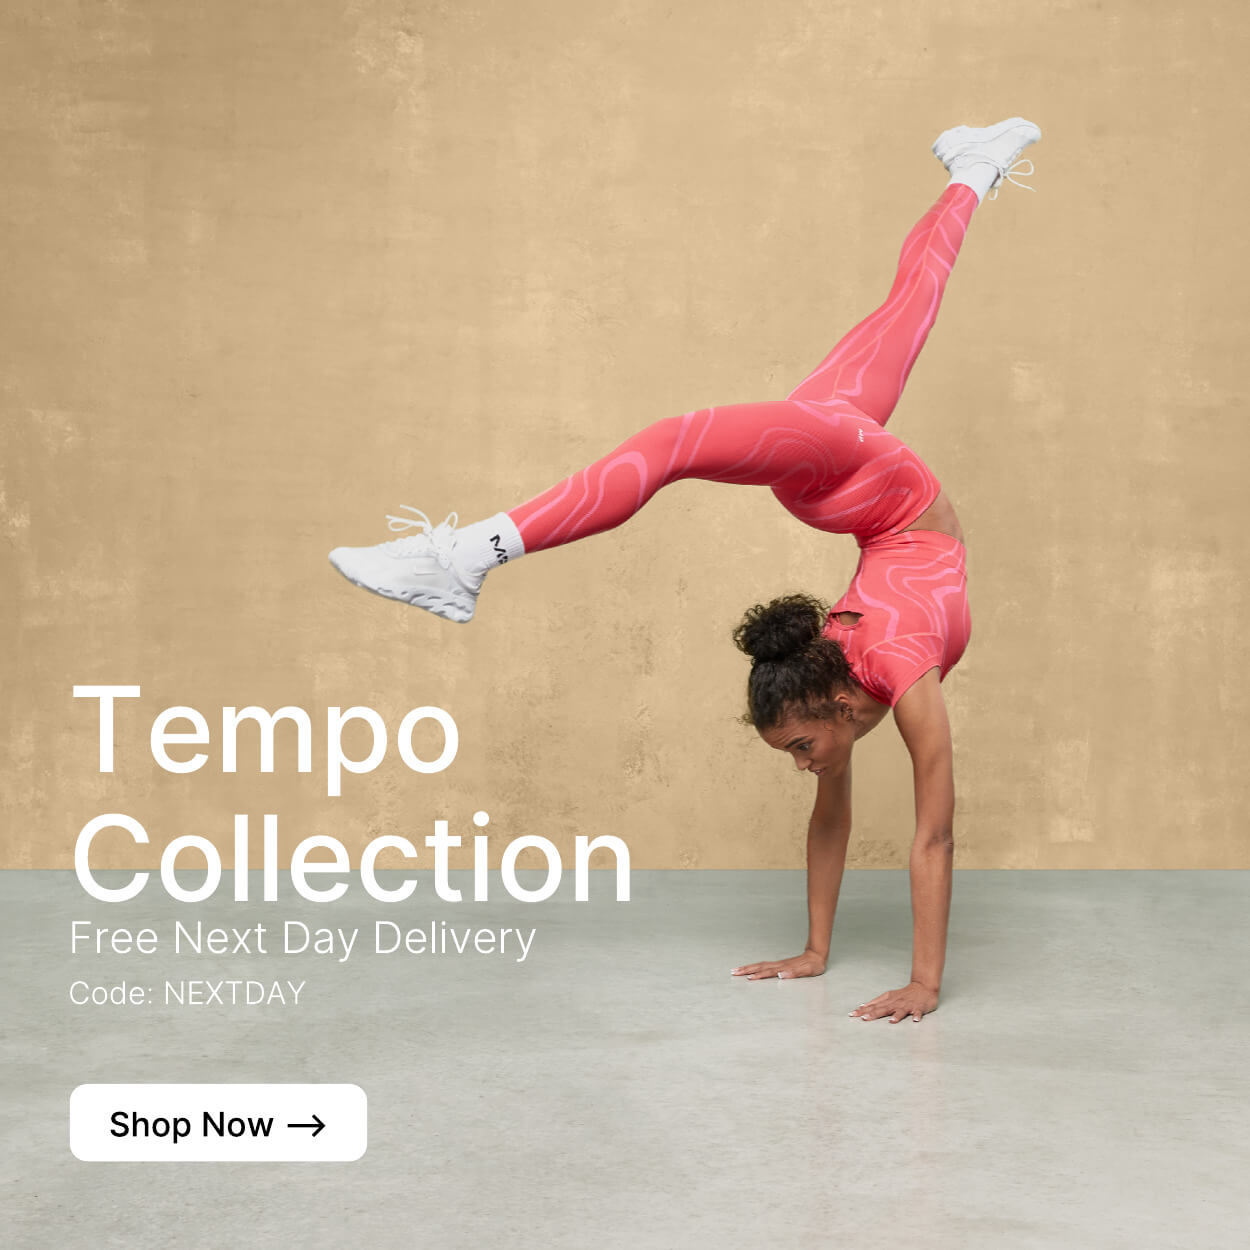 Ready for the new Tempo Collection? - MP Apparel